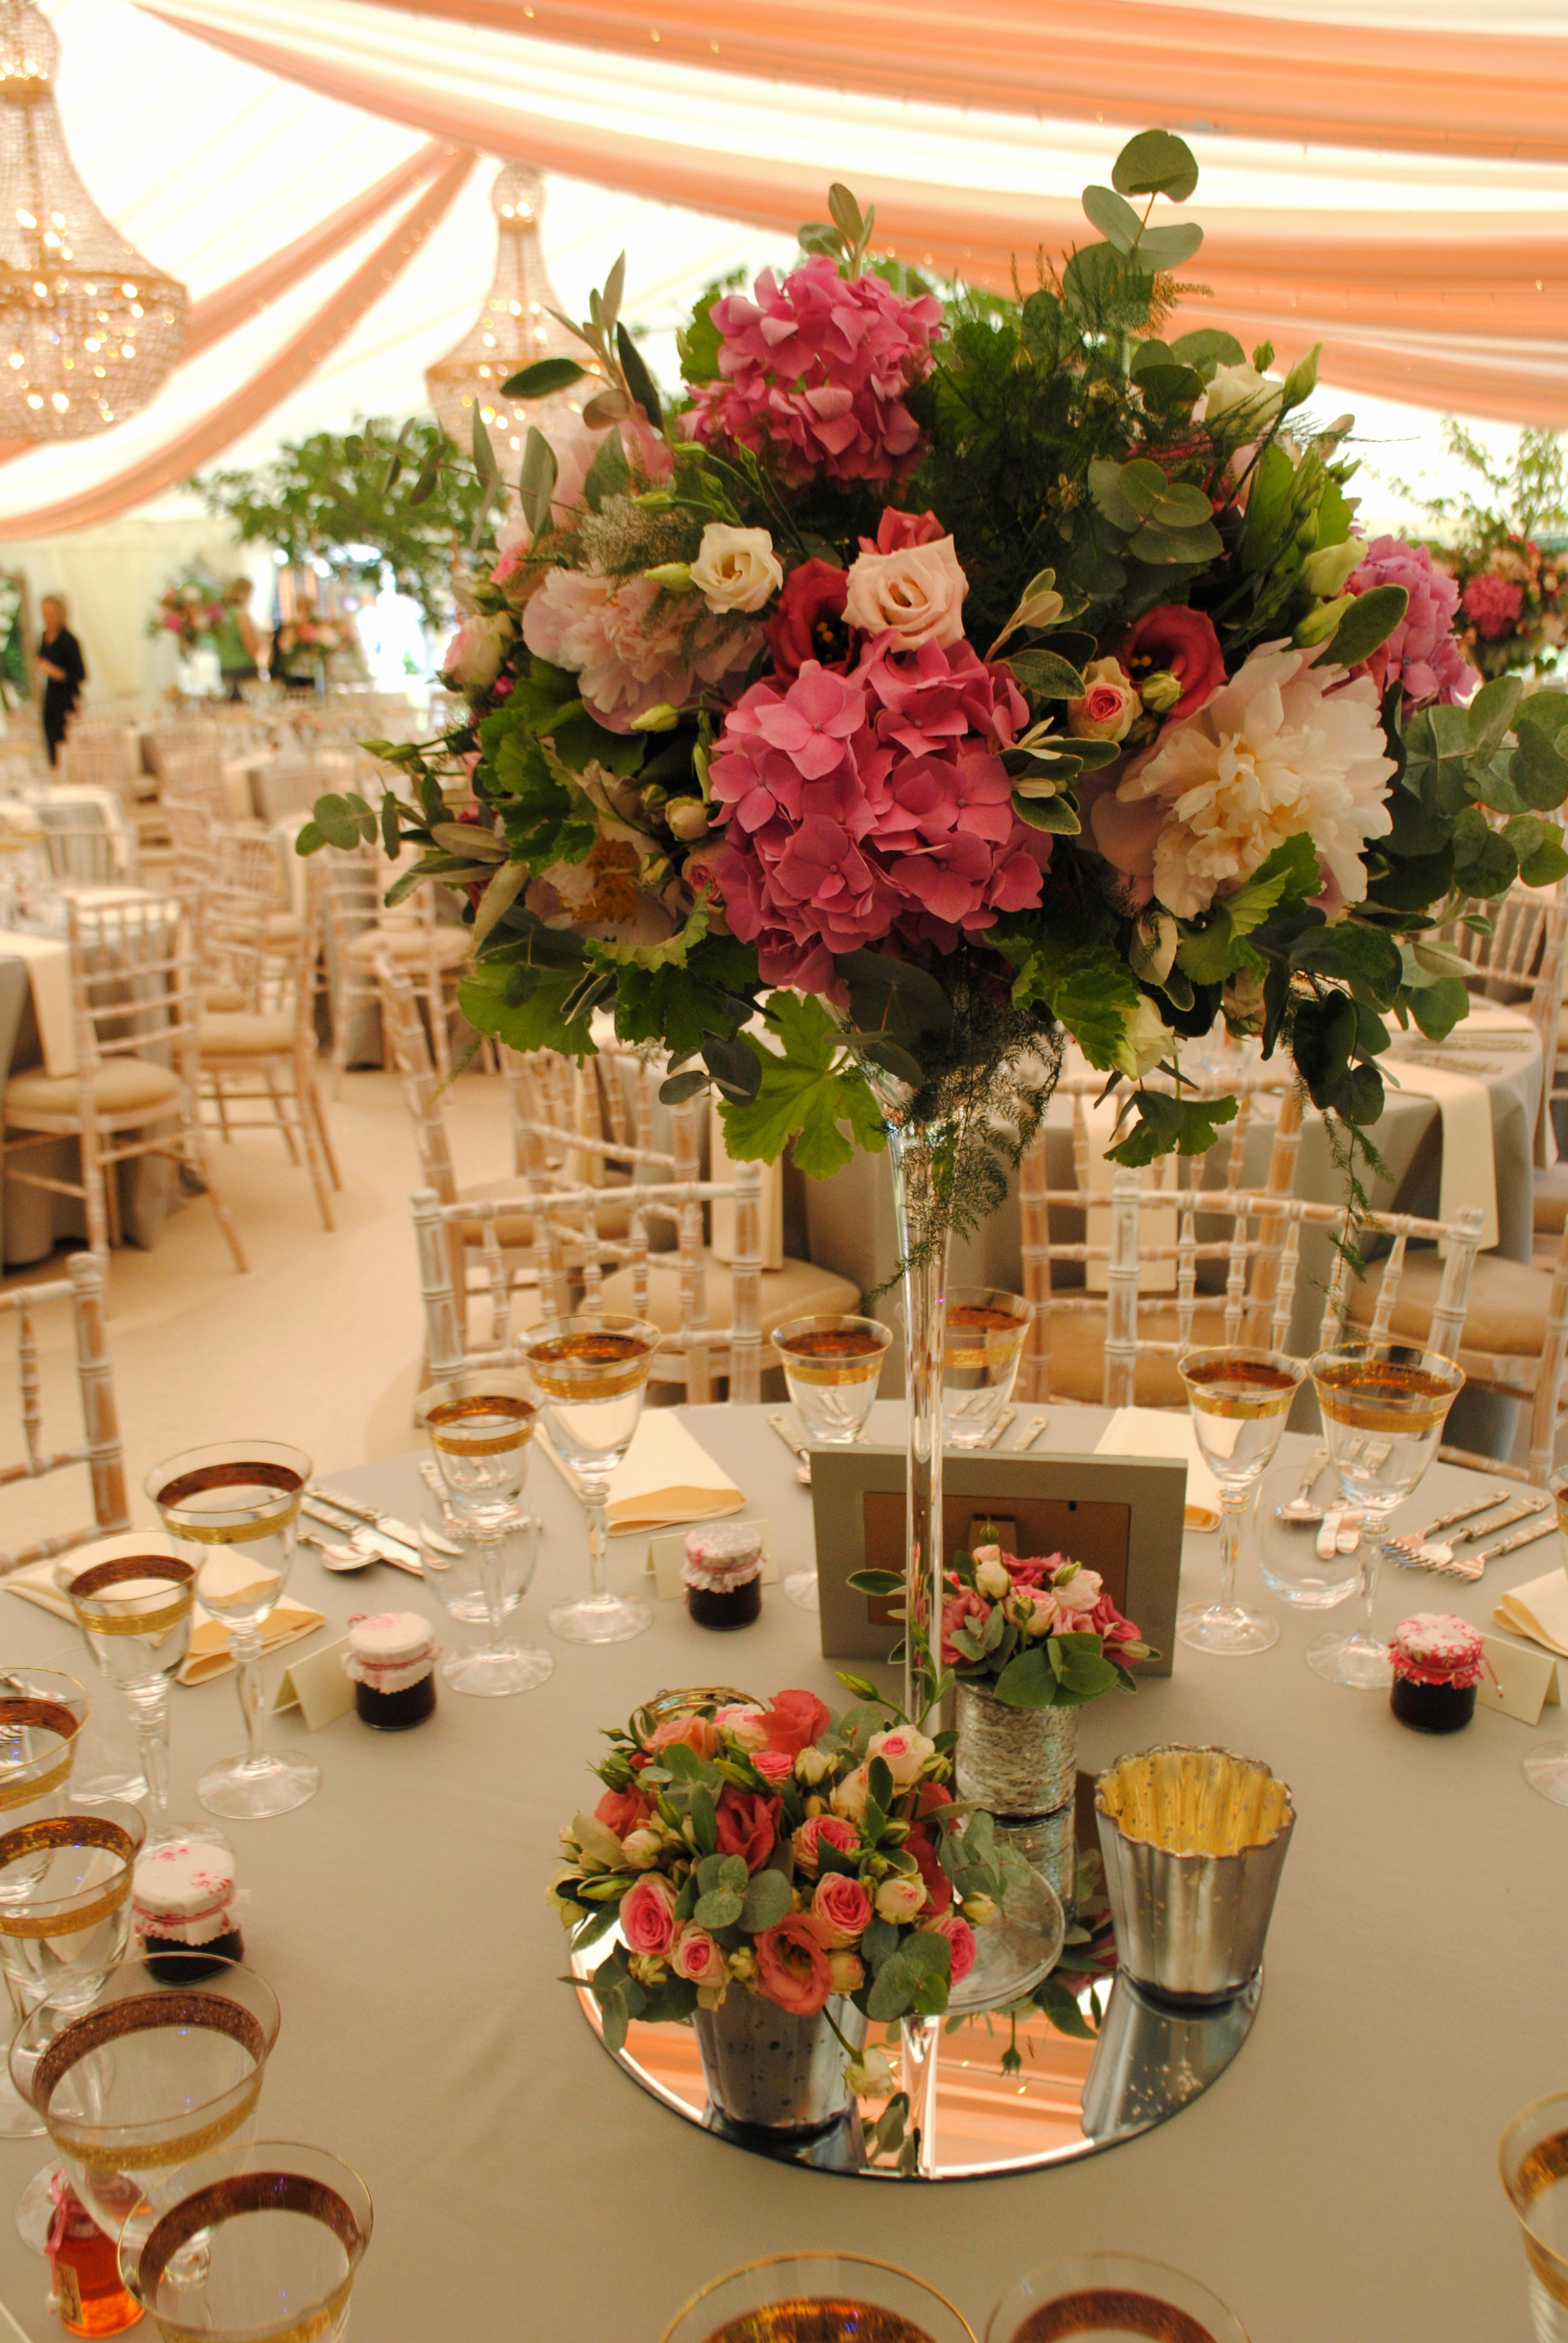 29 Fantastic Tall Vase Arrangements 2024 free download tall vase arrangements of wedding receptions table centerpieces new vases vase centerpieces in wedding receptions table centerpieces awesome flower table decorations inspirational boat cente